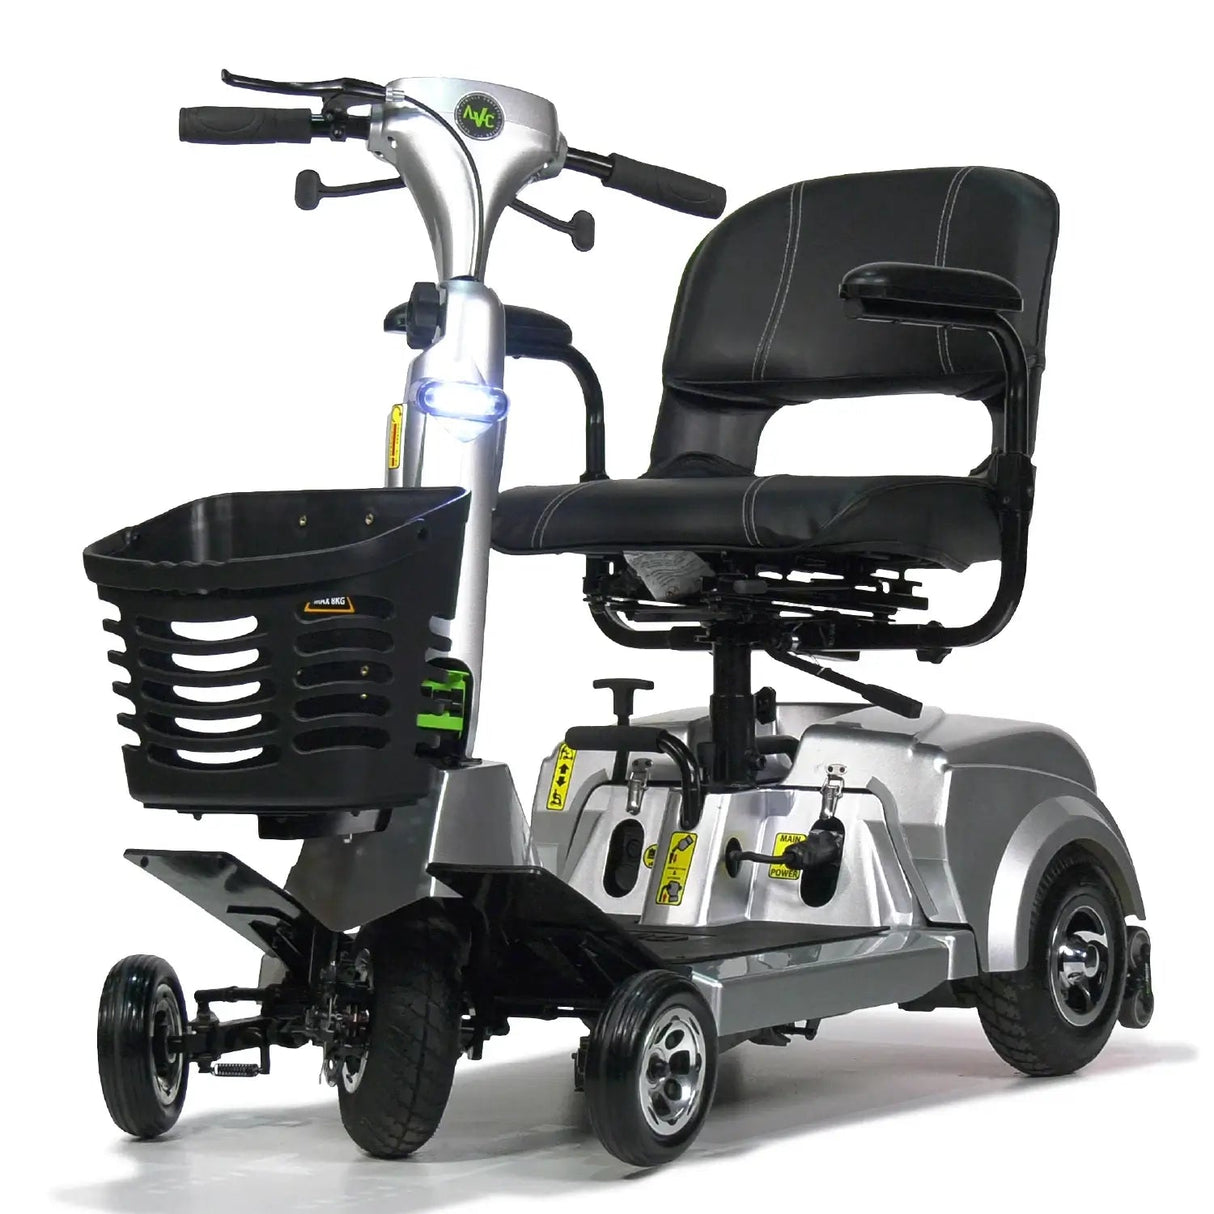 Quingo Ultra Mobility Scooter